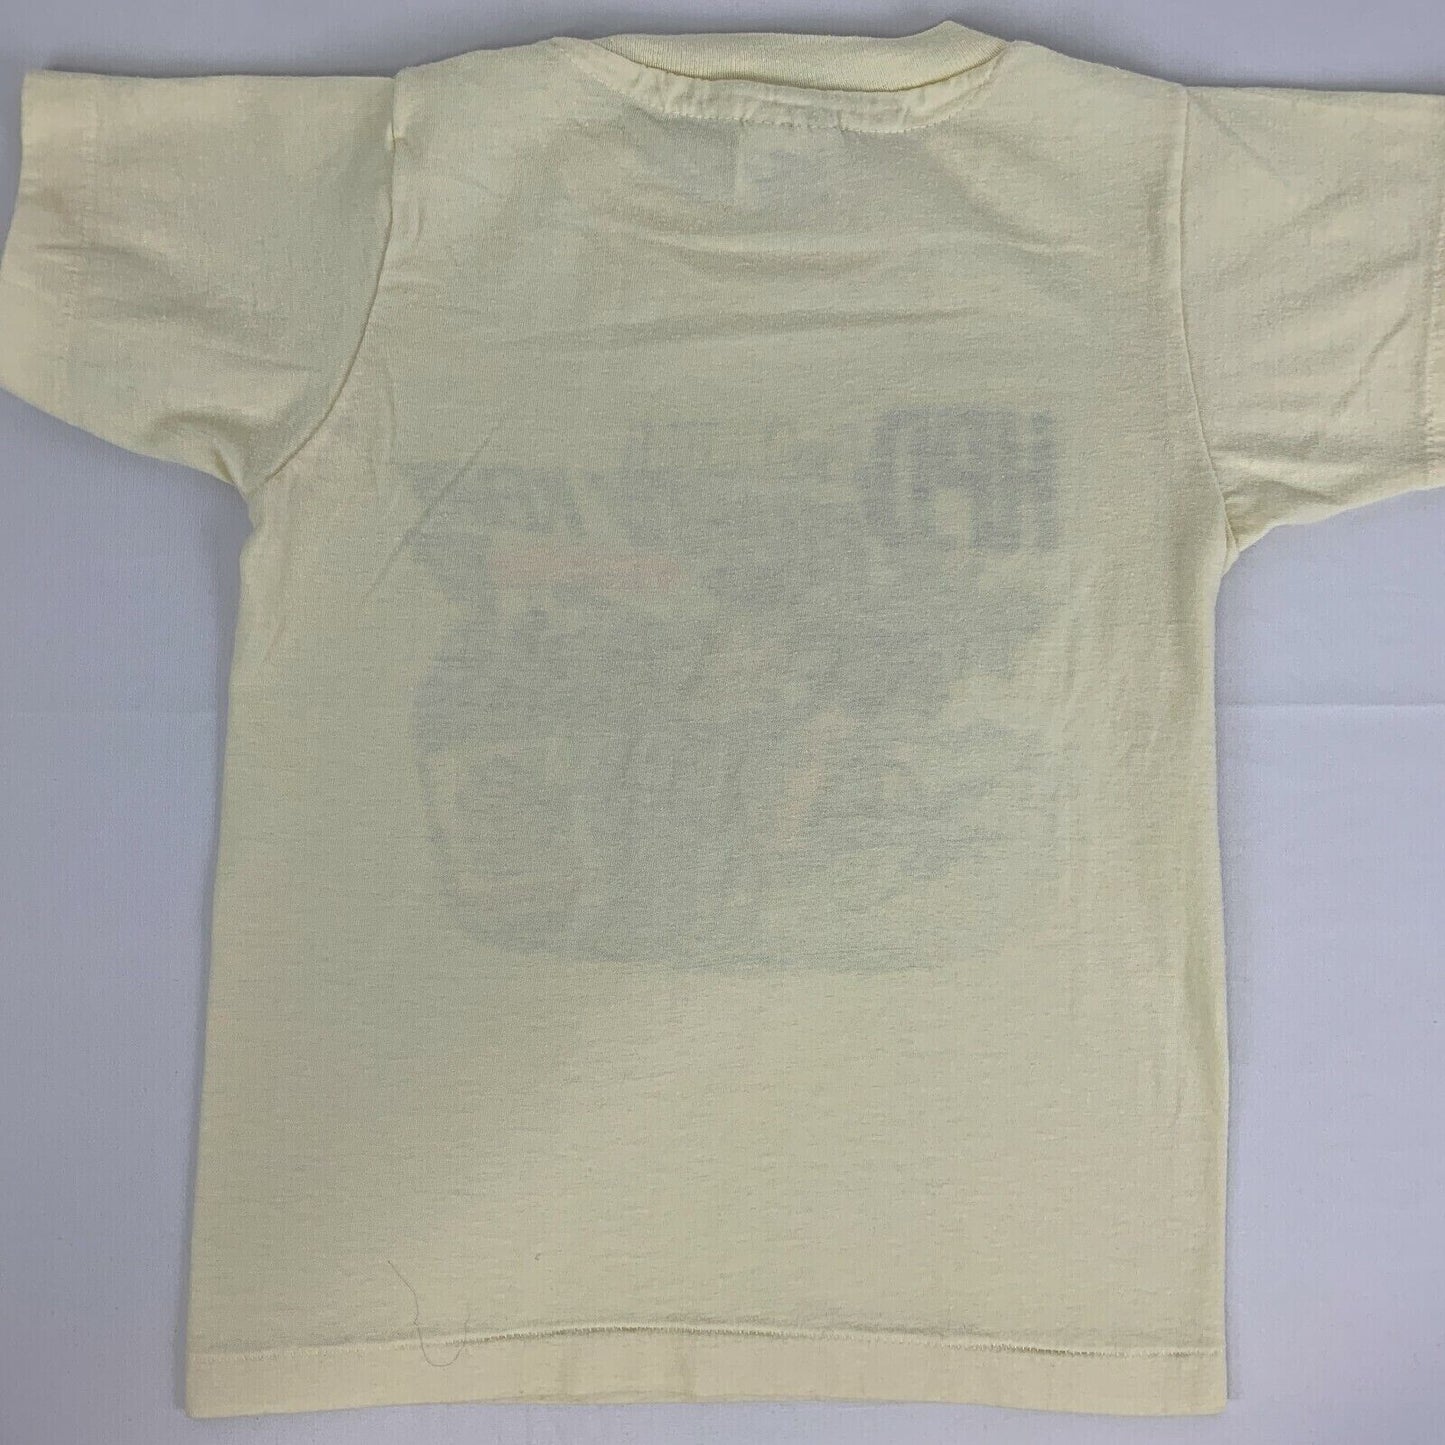 Houston Police Bike Relay Youth Vintage 80s T Shirt HPD Ivory Kids Small 6-8